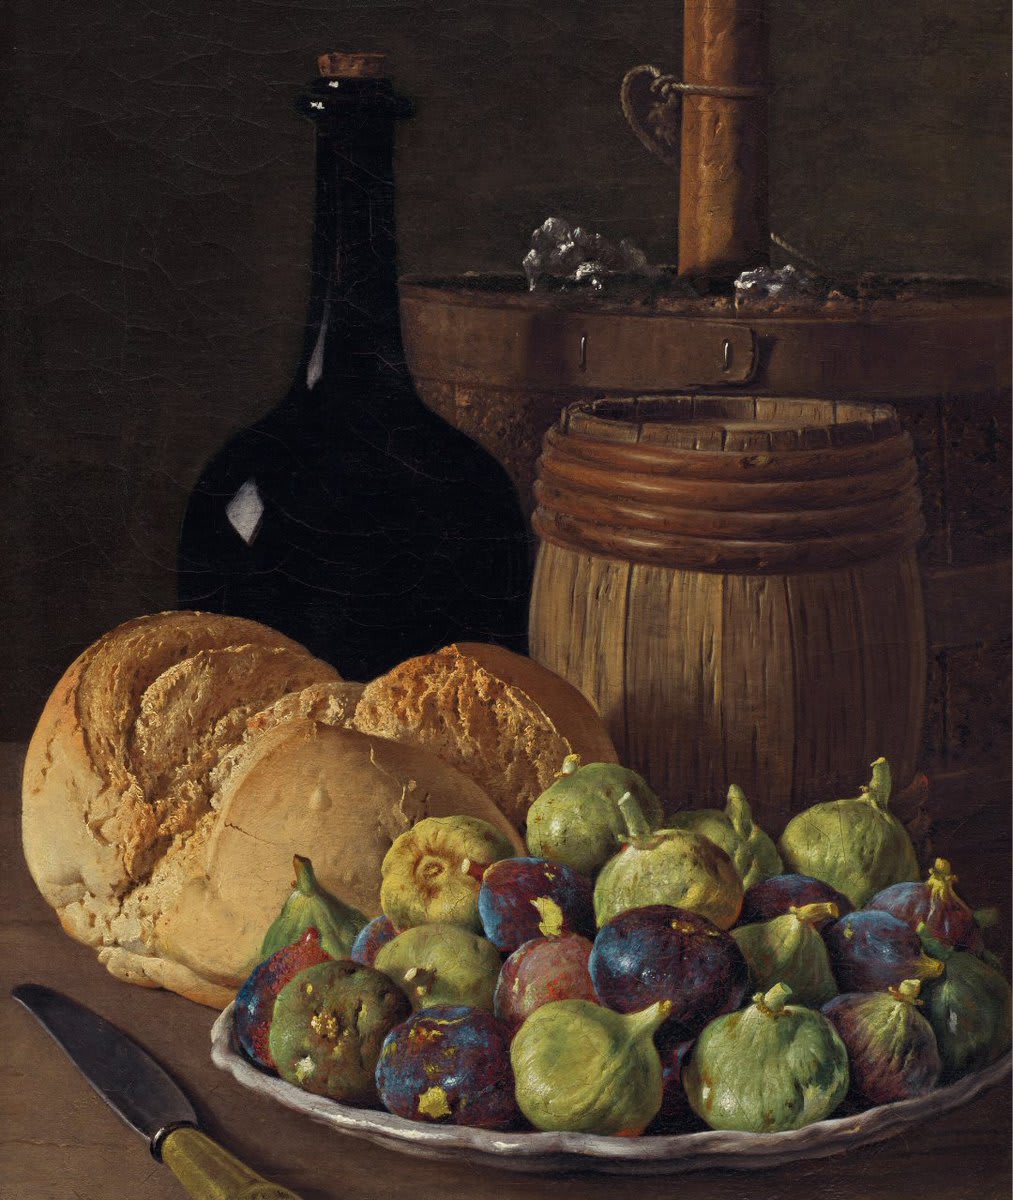 “The purplish tear drop, ripe with sweet uncertainty…” — Vivian Tu The mouth-watering details of Luis Meléndez's 1770 “Still Life with Figs and Bread” ✨